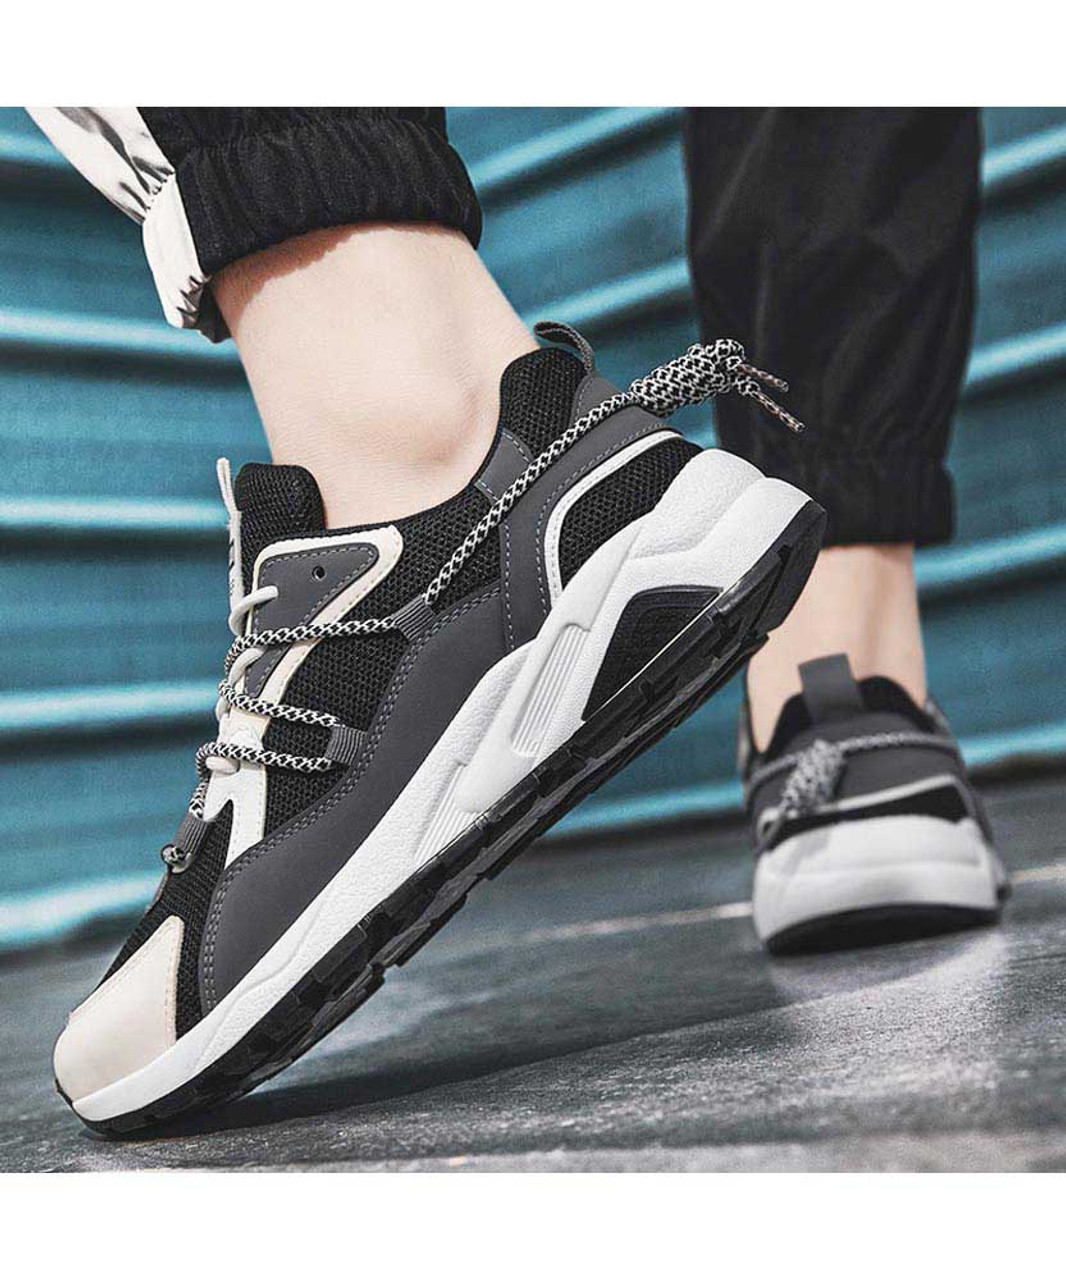 Black multi color shoe sneaker lace front and rear | Womens sneakers ...